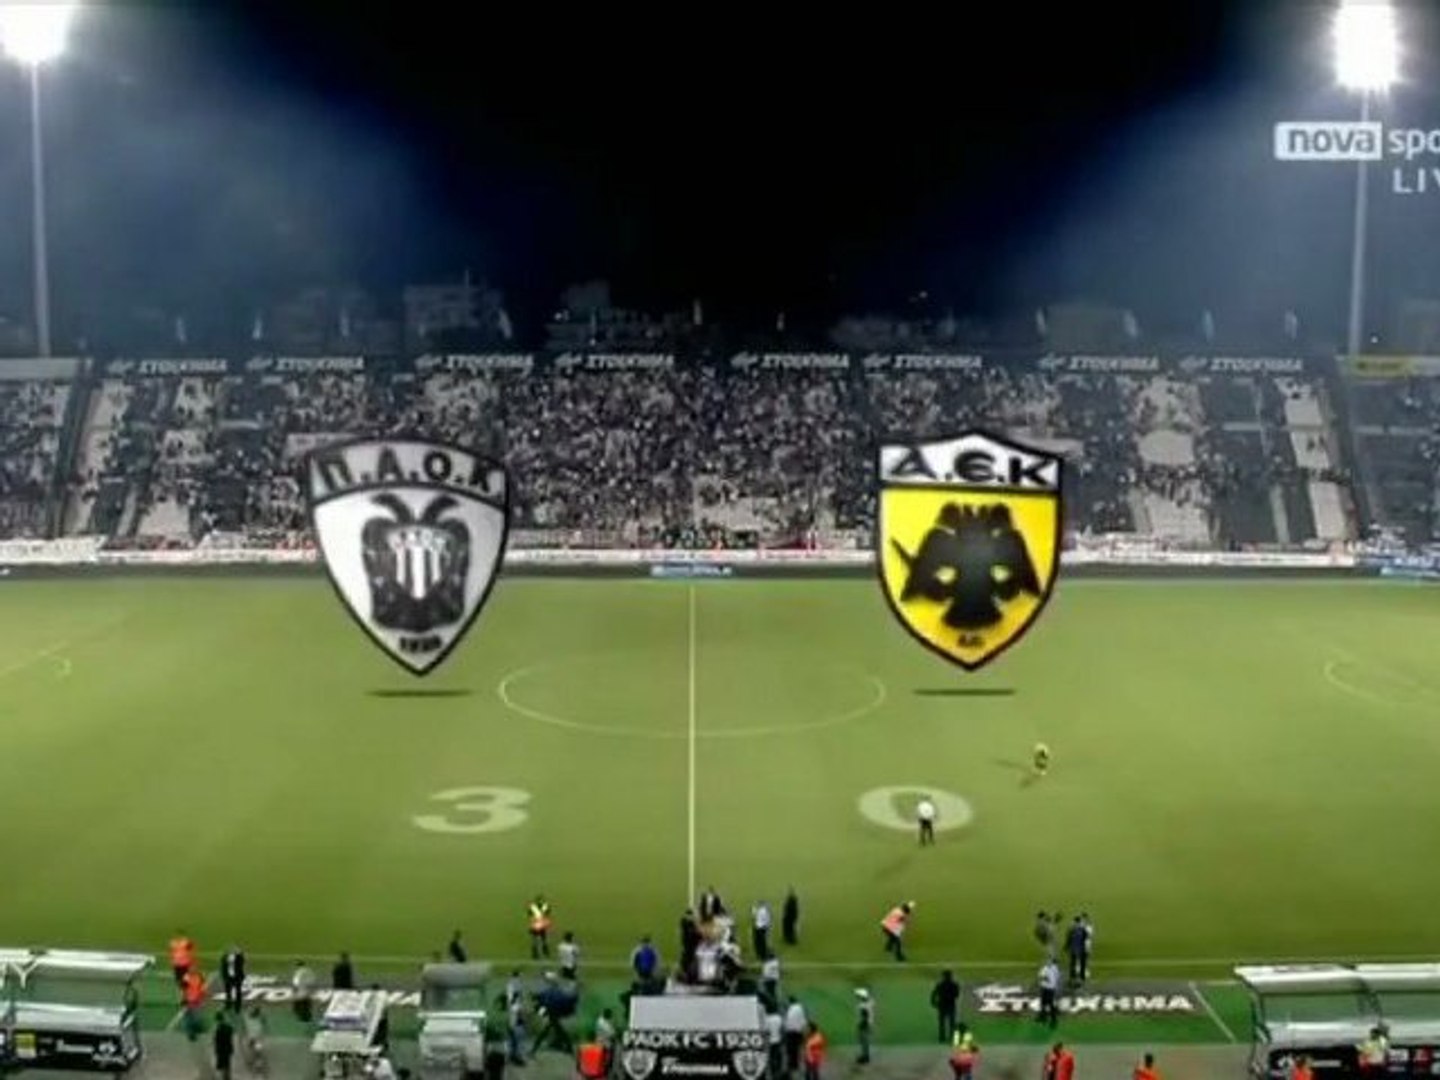 PAOK AEK 3-0 DAY 4 (11-12)highlights - video Dailymotion